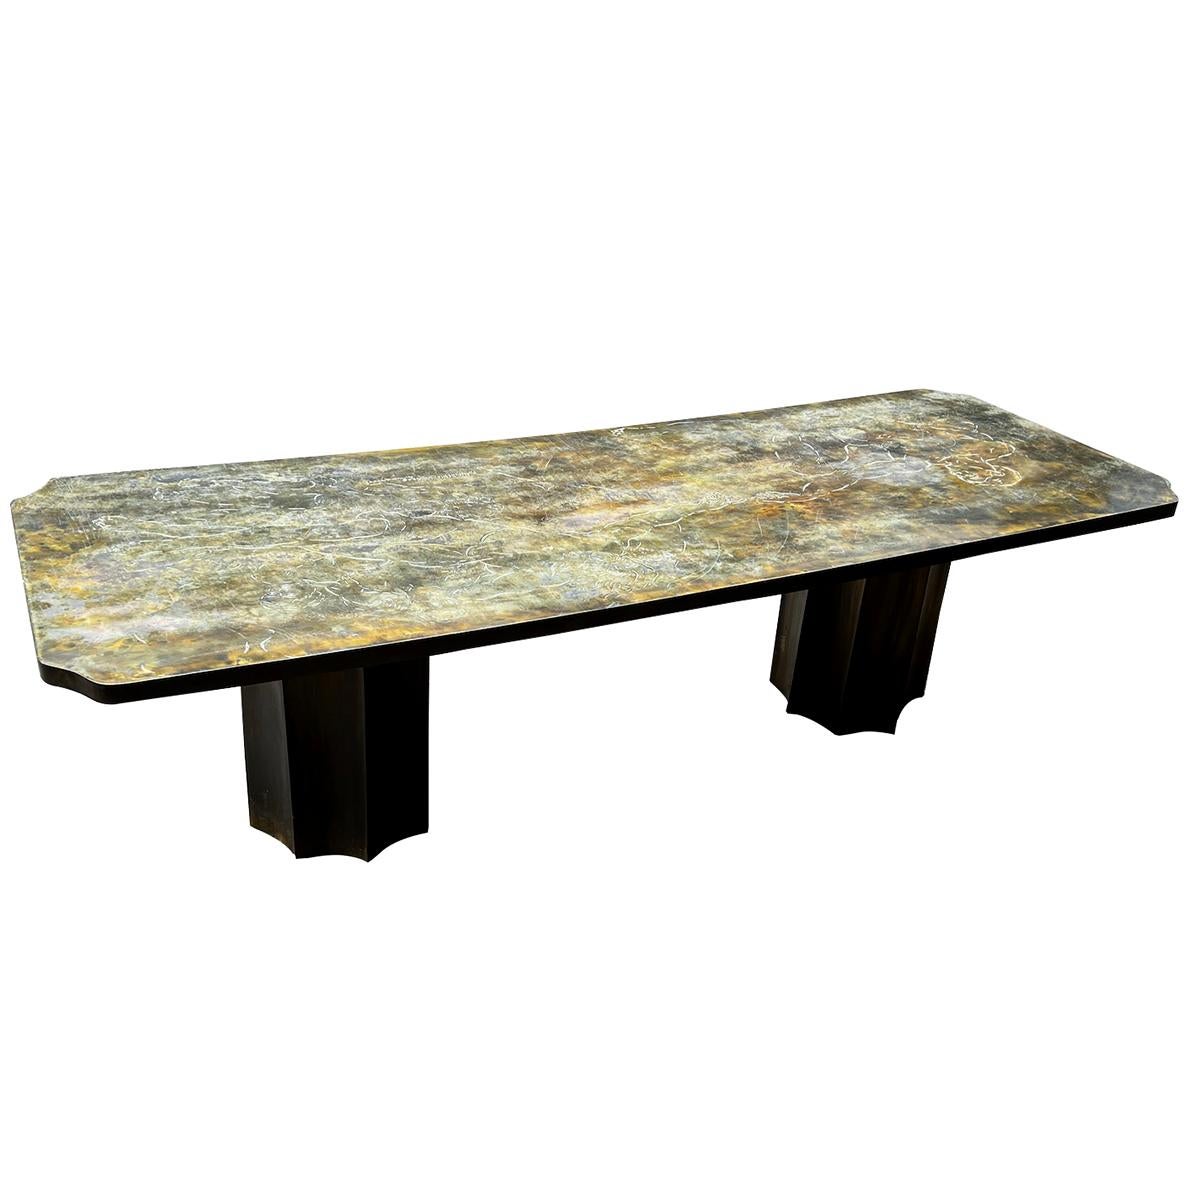 A circa 1970's LaVerne coffee table with pedestal base and original patina.

Measurements:
length: 65